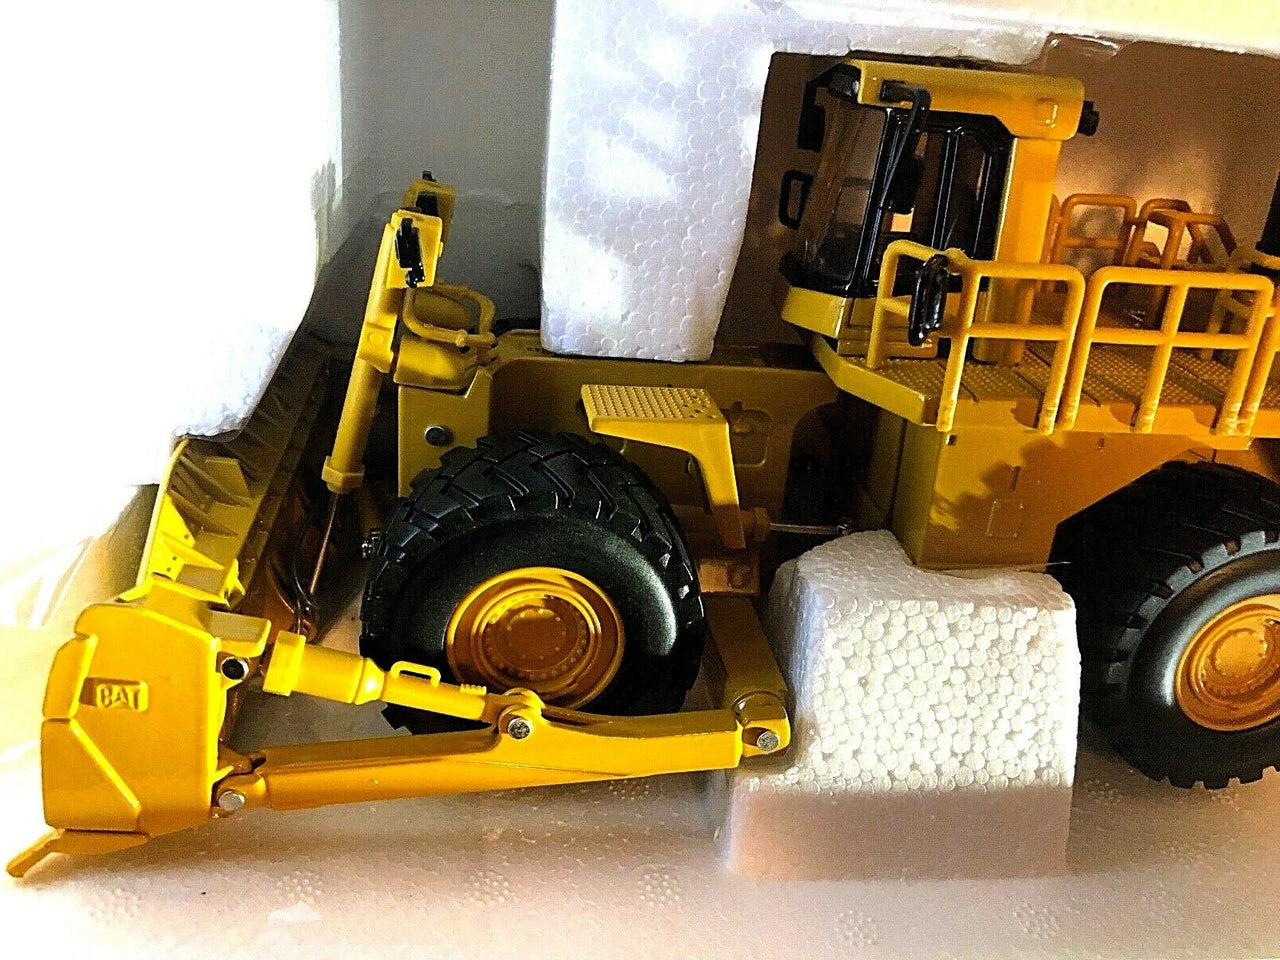 55159 Caterpillar 854G Wheel Tractor Scale 1:50 (Discontinued Model)